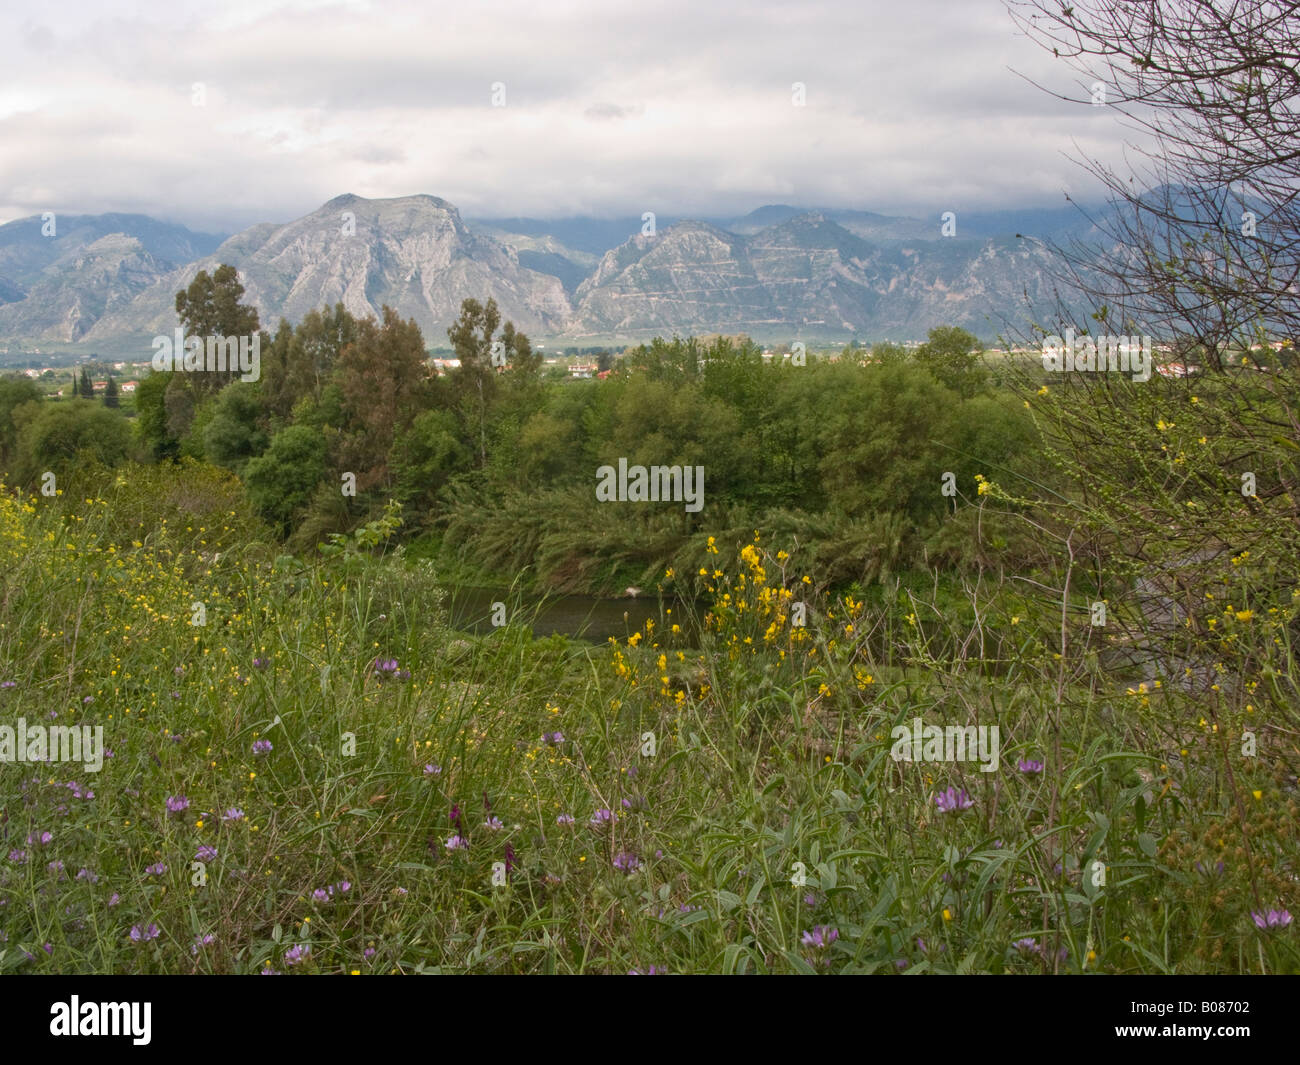 view of Mount Taygetos from the banks of the Eurotas river beside Sparta, Lakonia province, Peloponnese, Greece Stock Photo